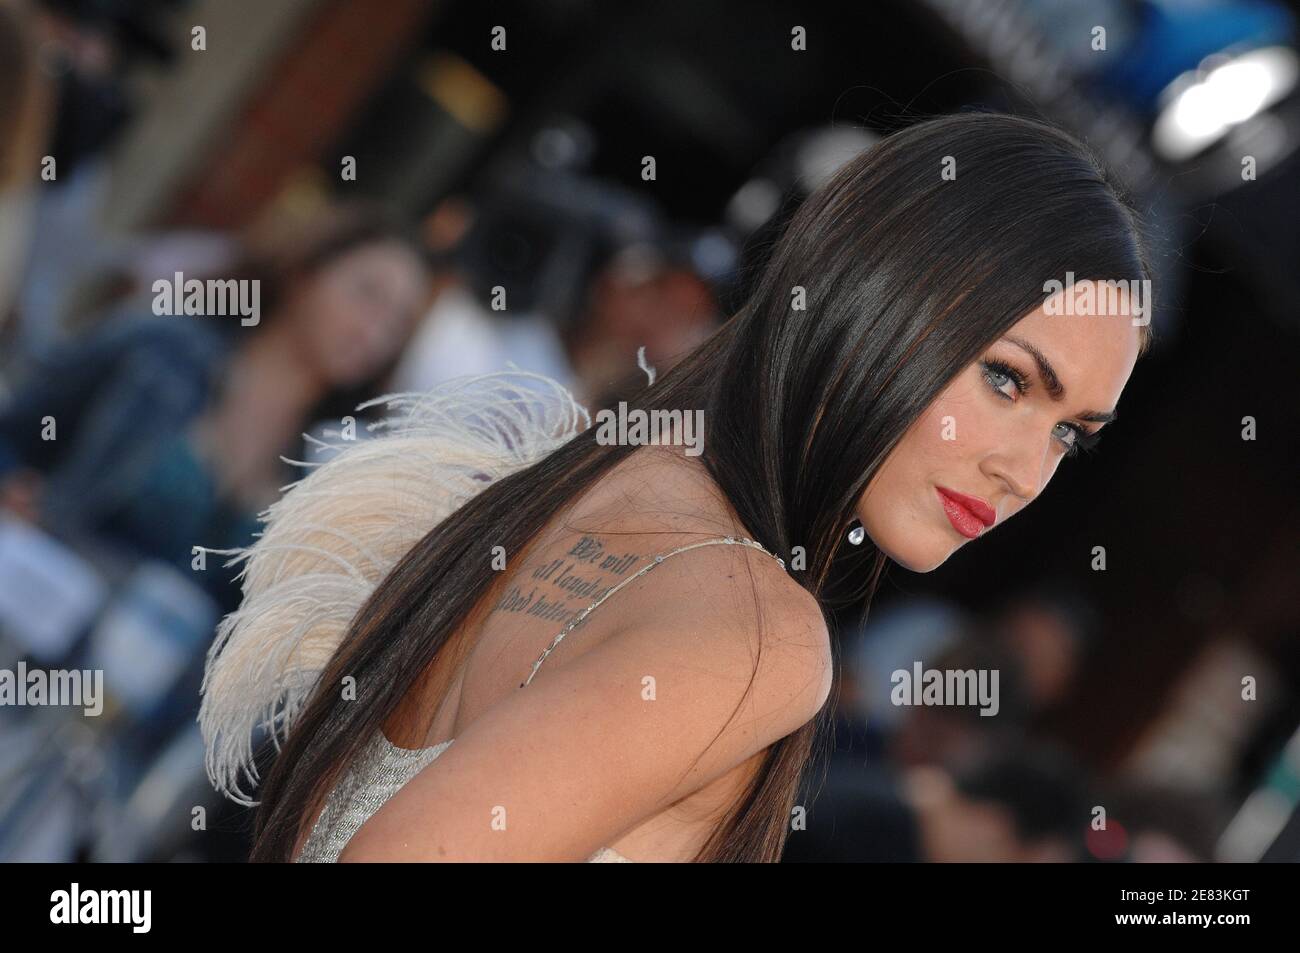 Megan Fox attends the premiere of Paramount Pictures "Transformers" at the Mann Village Theatre in Westwood, Los Angeles, June 27, 2007. (Pictured: Megan Fox). Photo by Lionel Hahn/ABACAPRESS.COM Stock Photo